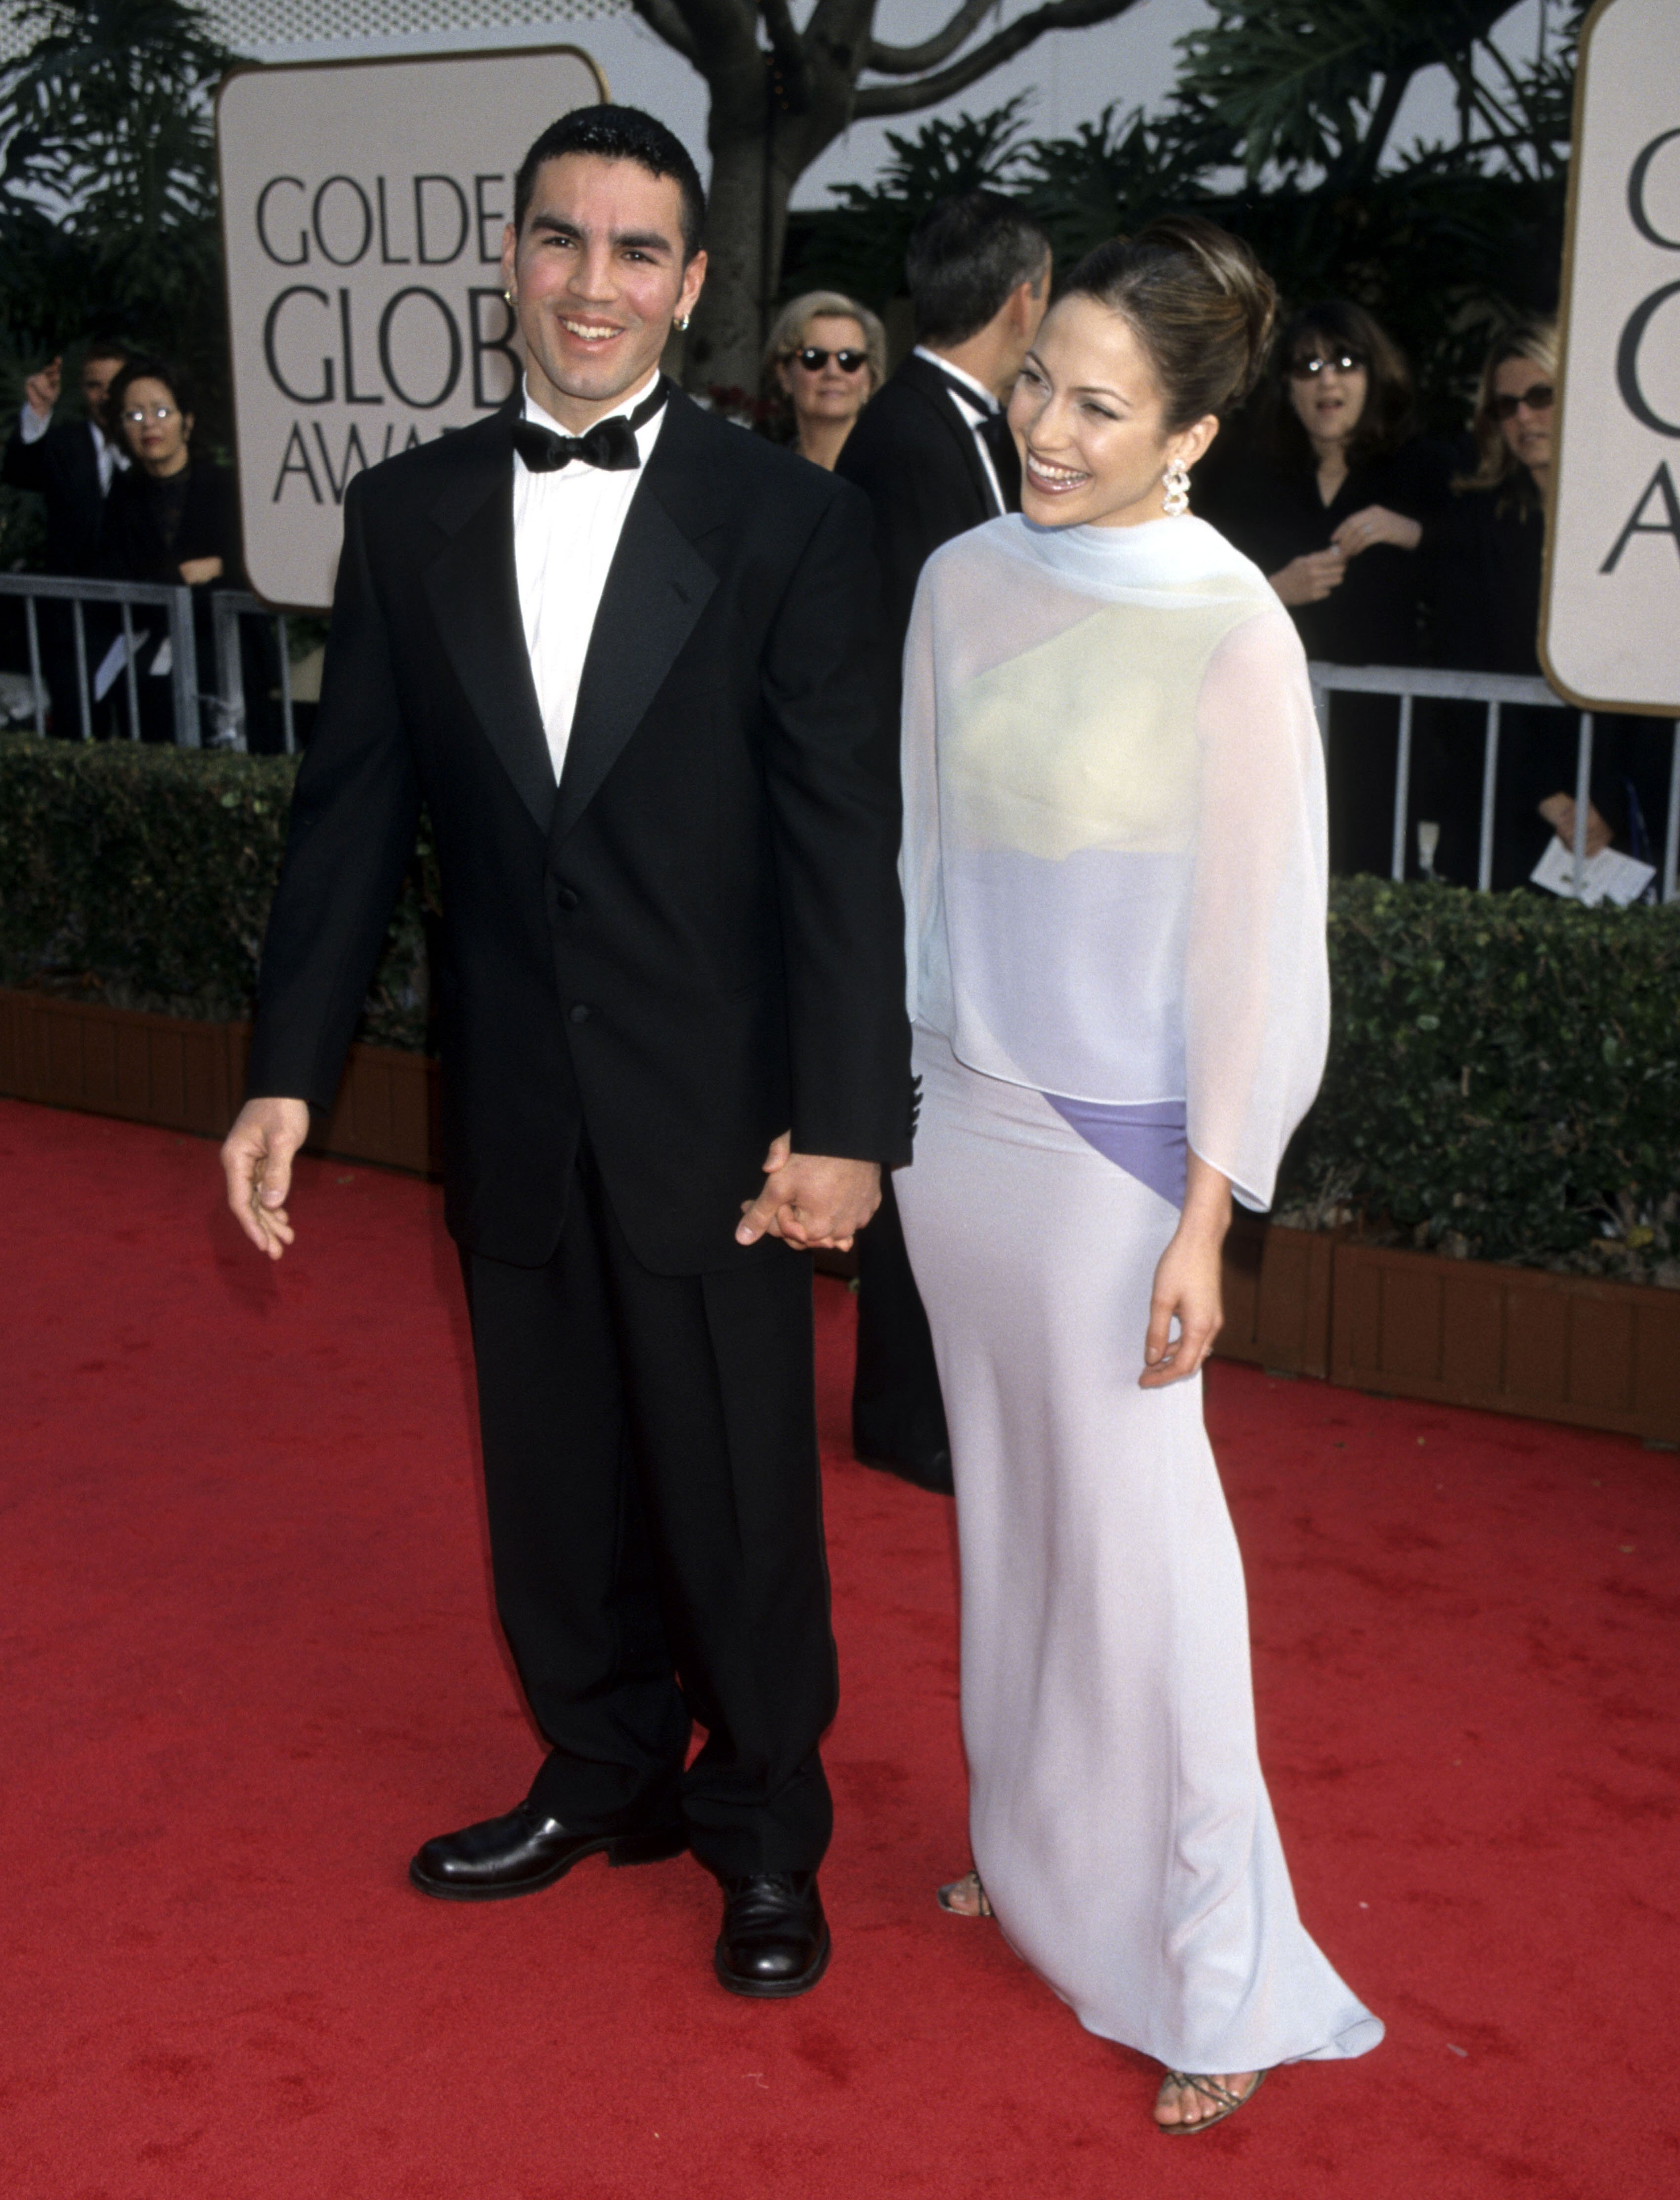 Ojani Noa and Jennifer Lopez during the 55th Annual Golden Globe Awards in Beverly Hills, California, on January 18, 1998. | Source: Getty Images